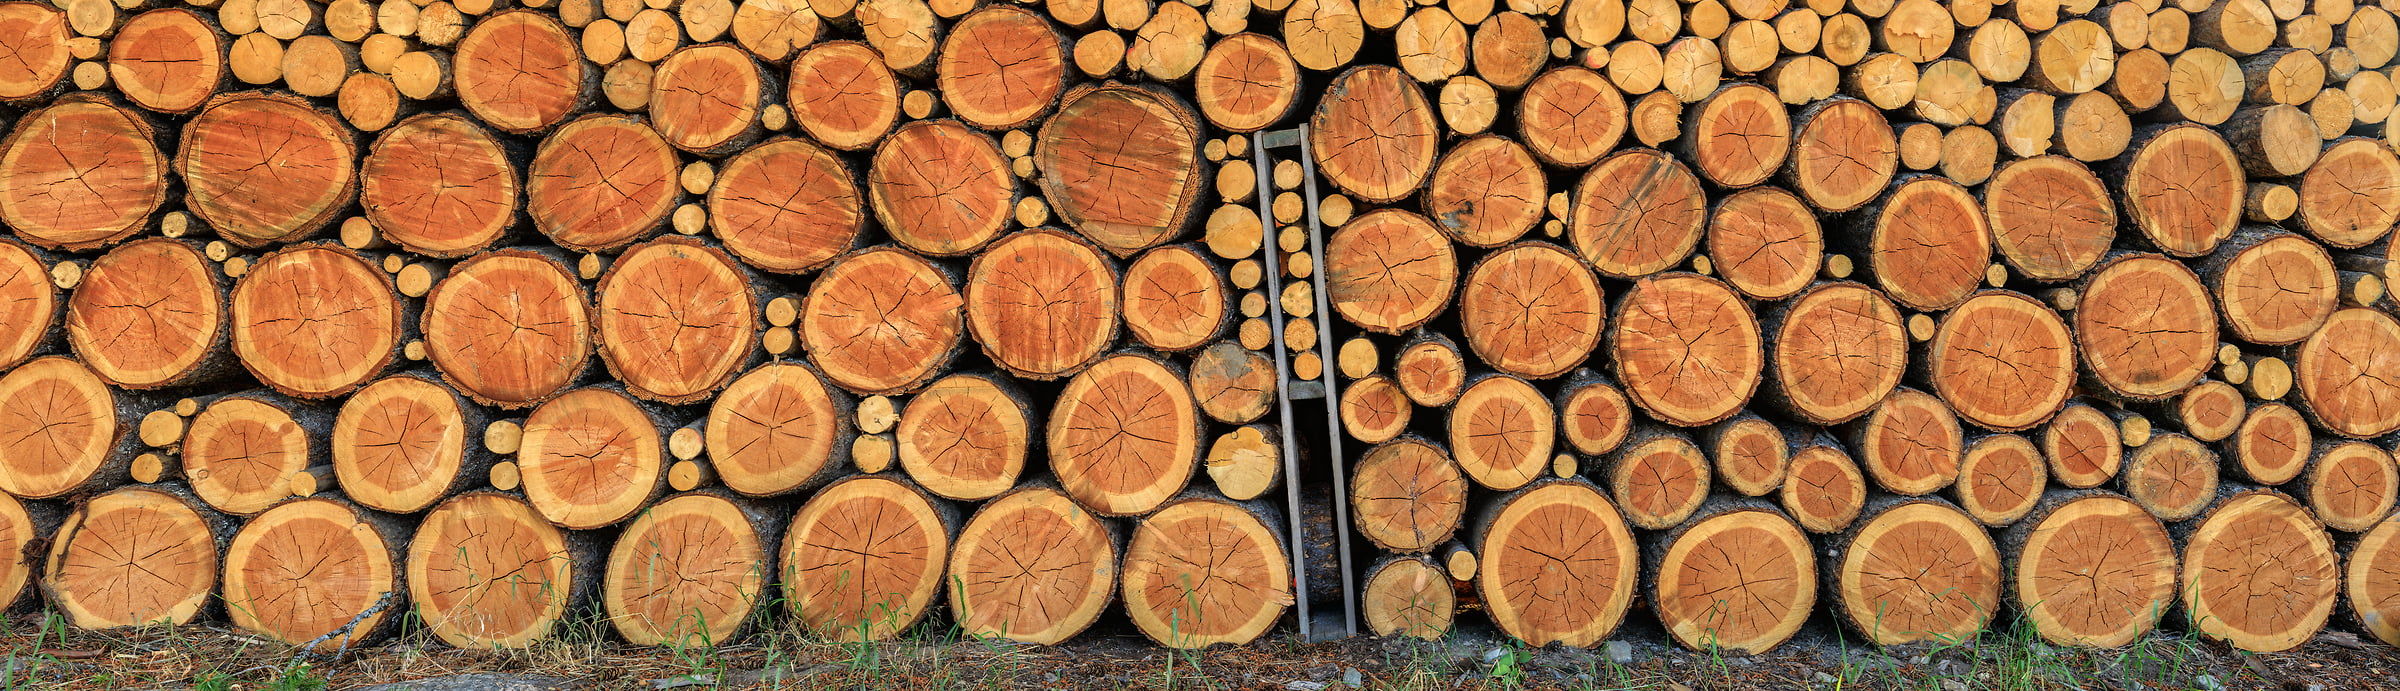 1,128 megapixels! A very high resolution, large-format VAST photo of cut wood stacked in a pile; outdoor textures photograph created by Scott Dimond in Eureka, Montana